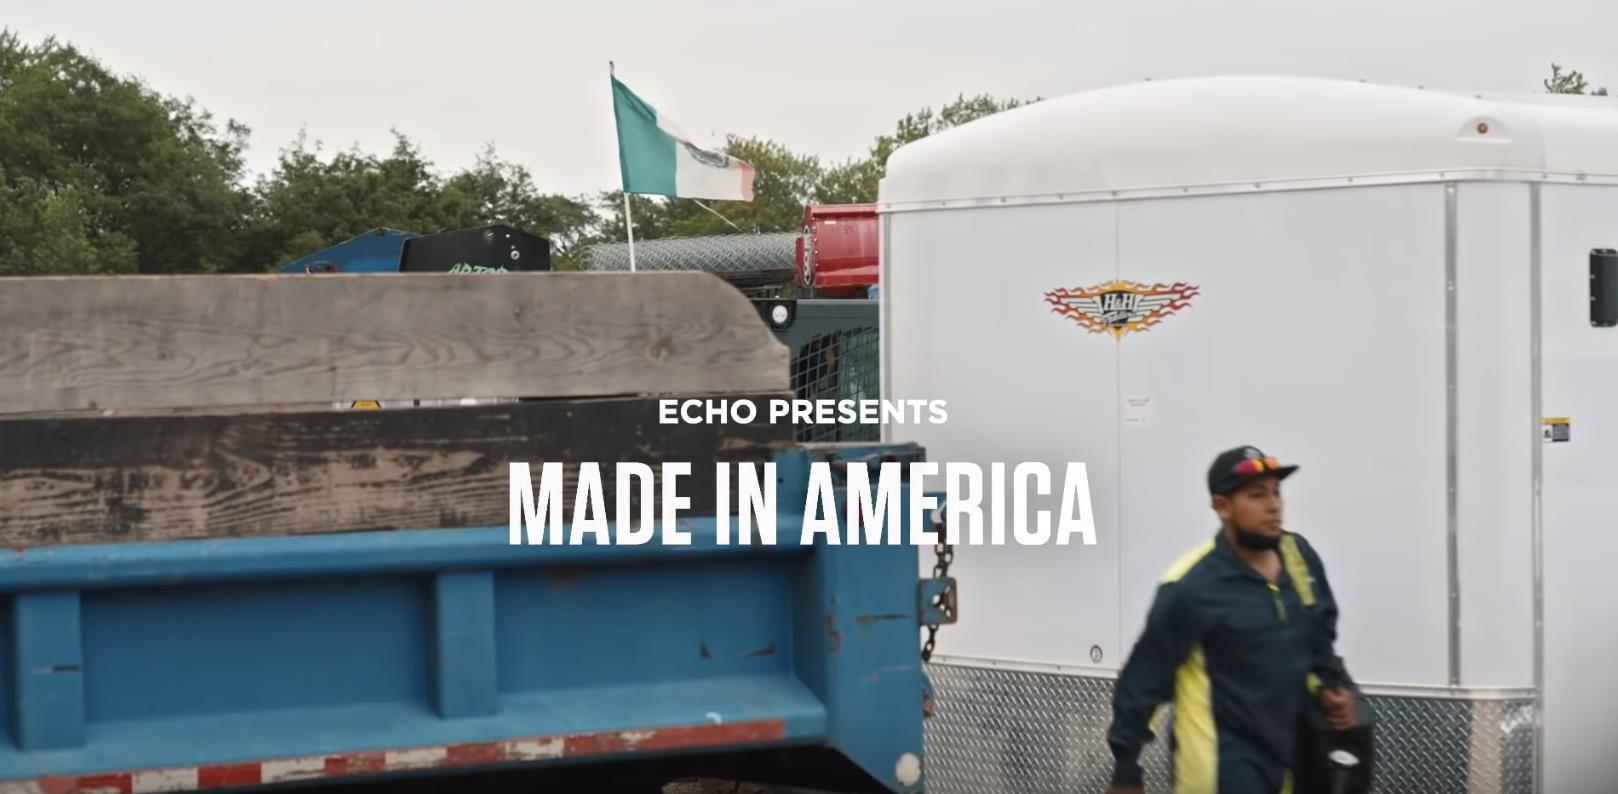 Cramer-Krasselt tells story of South Side landscapers in work for ECHO USA